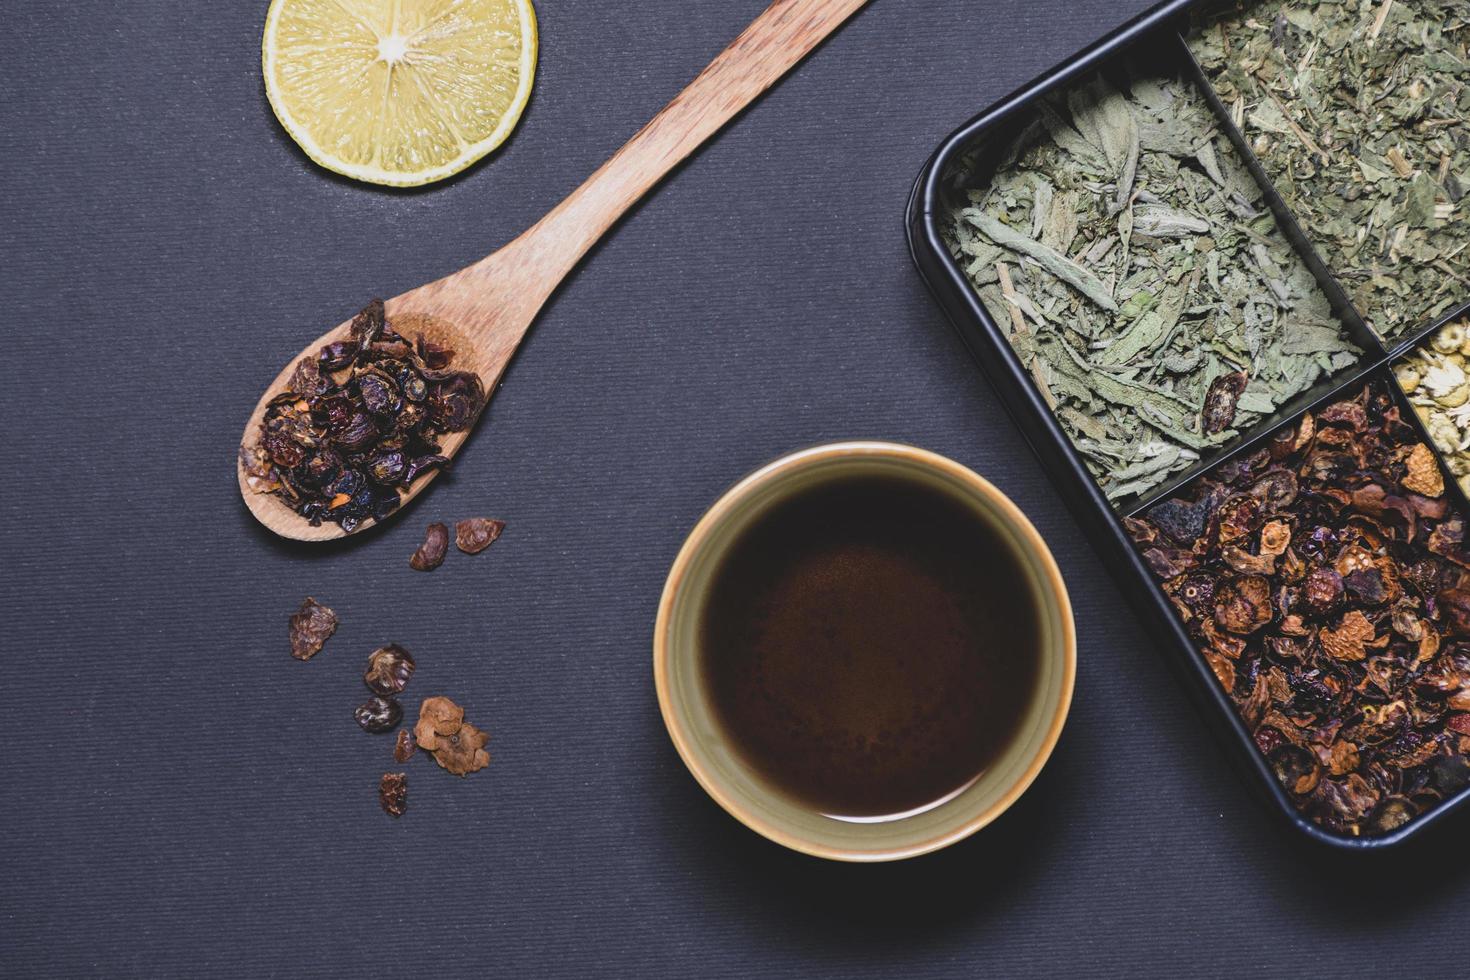 A cup of tea next to a wooden spoon, a slice of lemon and a box full of different tea leaves photo